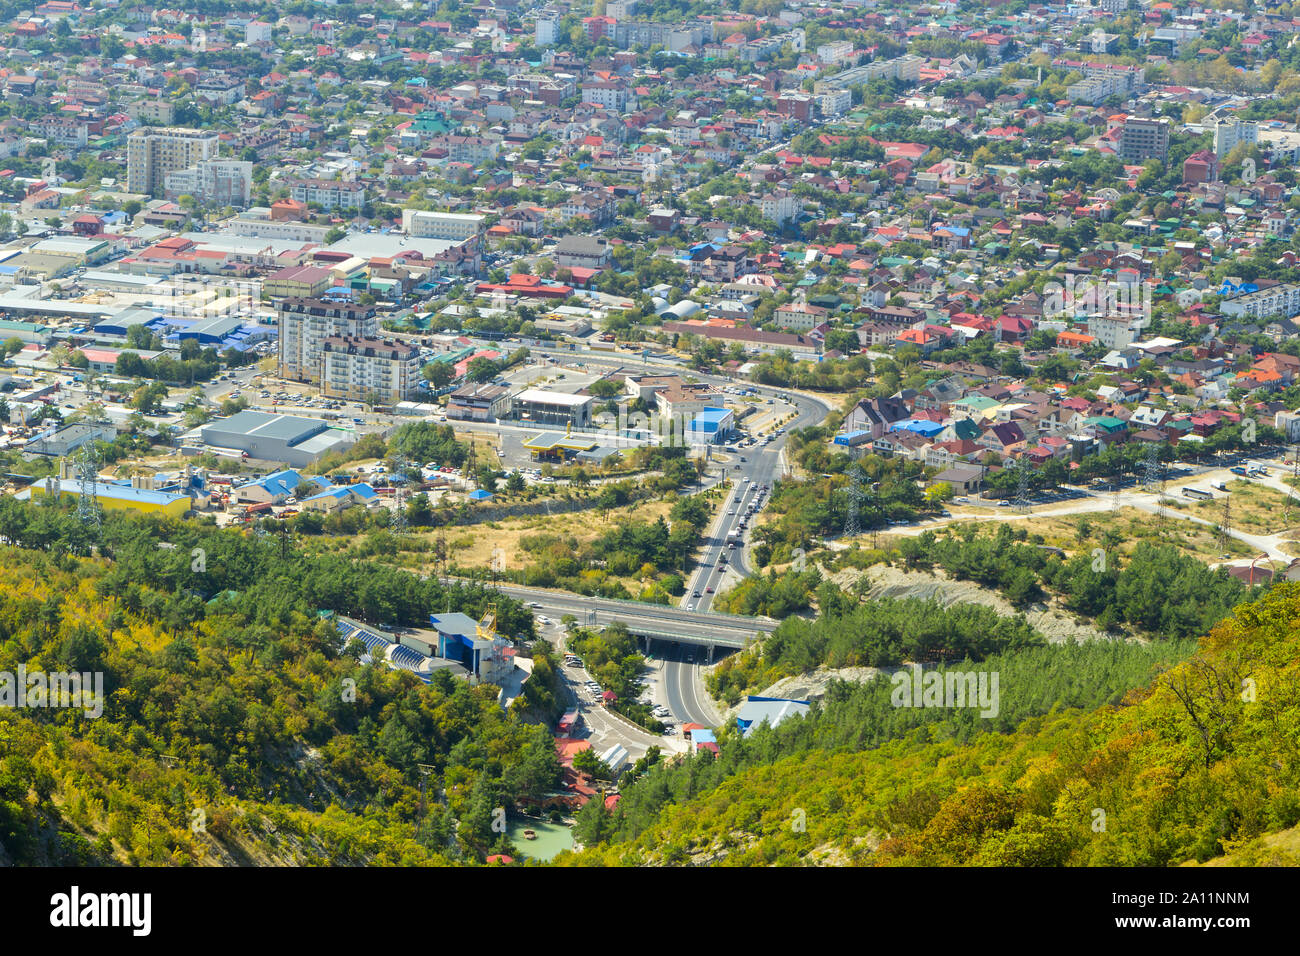 Aerial view of Gelendzhik resort city district from hill of caucasian mountains. Buildings and street at the foot of the mountains. Stock Photo